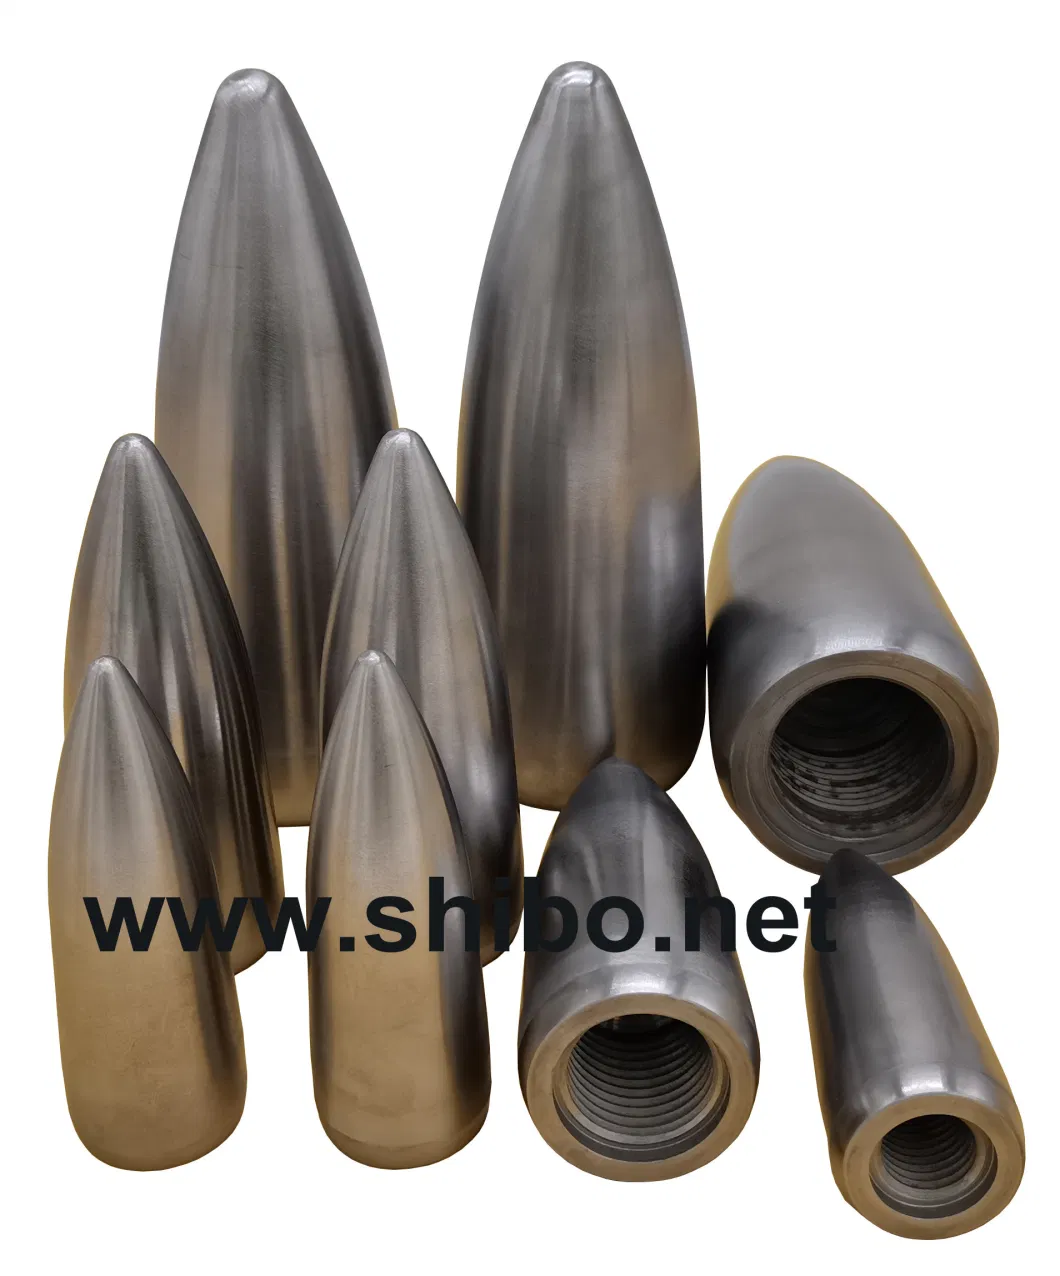 Molybdenum Base Piercing Plug for Seamless Alloy Steel Pipes Production